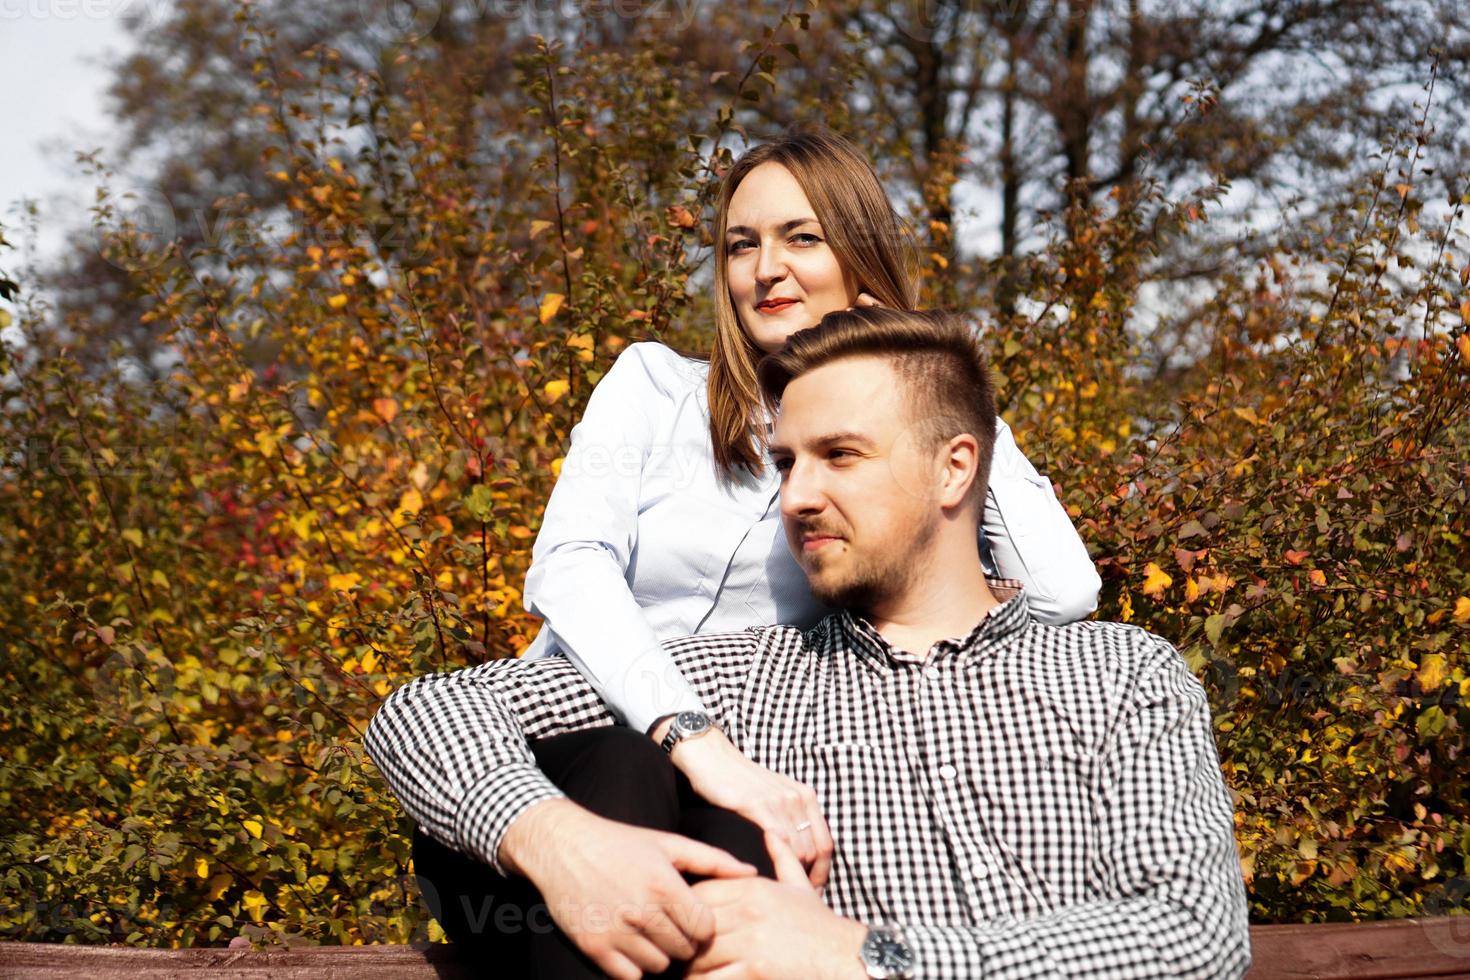 Romantic couple in autumn park - love, relationship and dating concept photo